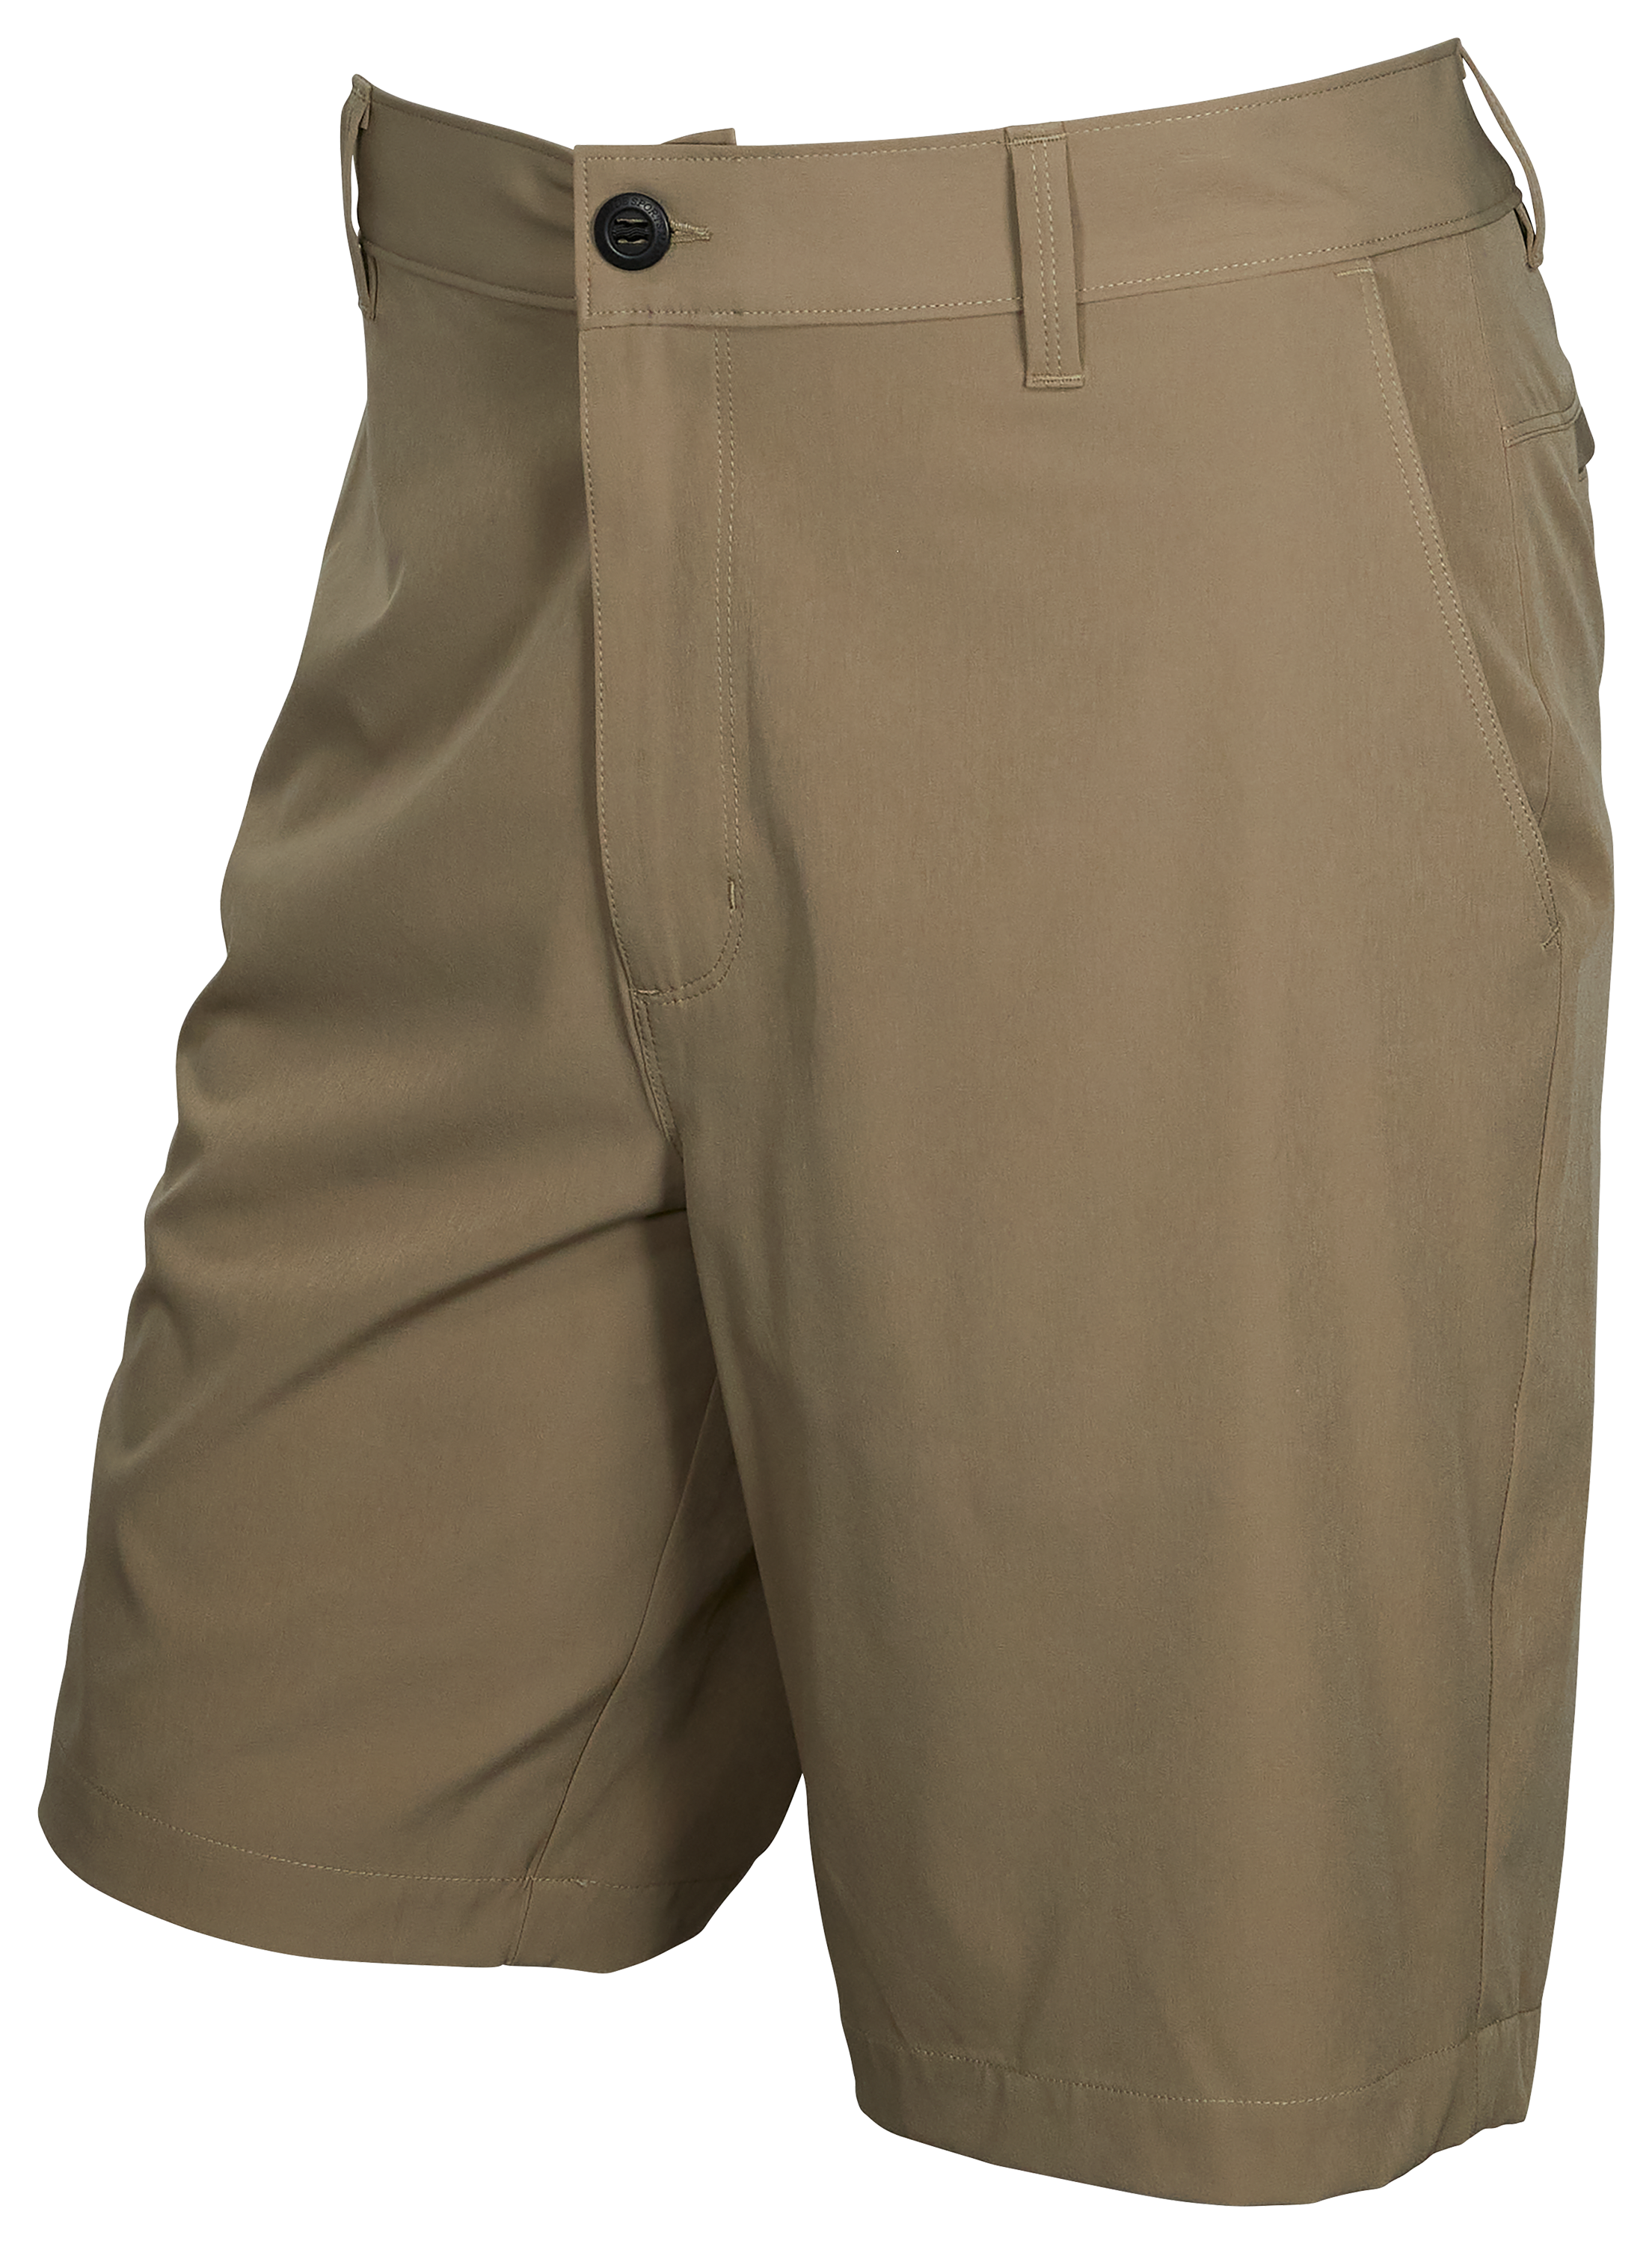 World Wide Sportsman Pescador Stretch Fishing Shorts for Men - Timber - 42